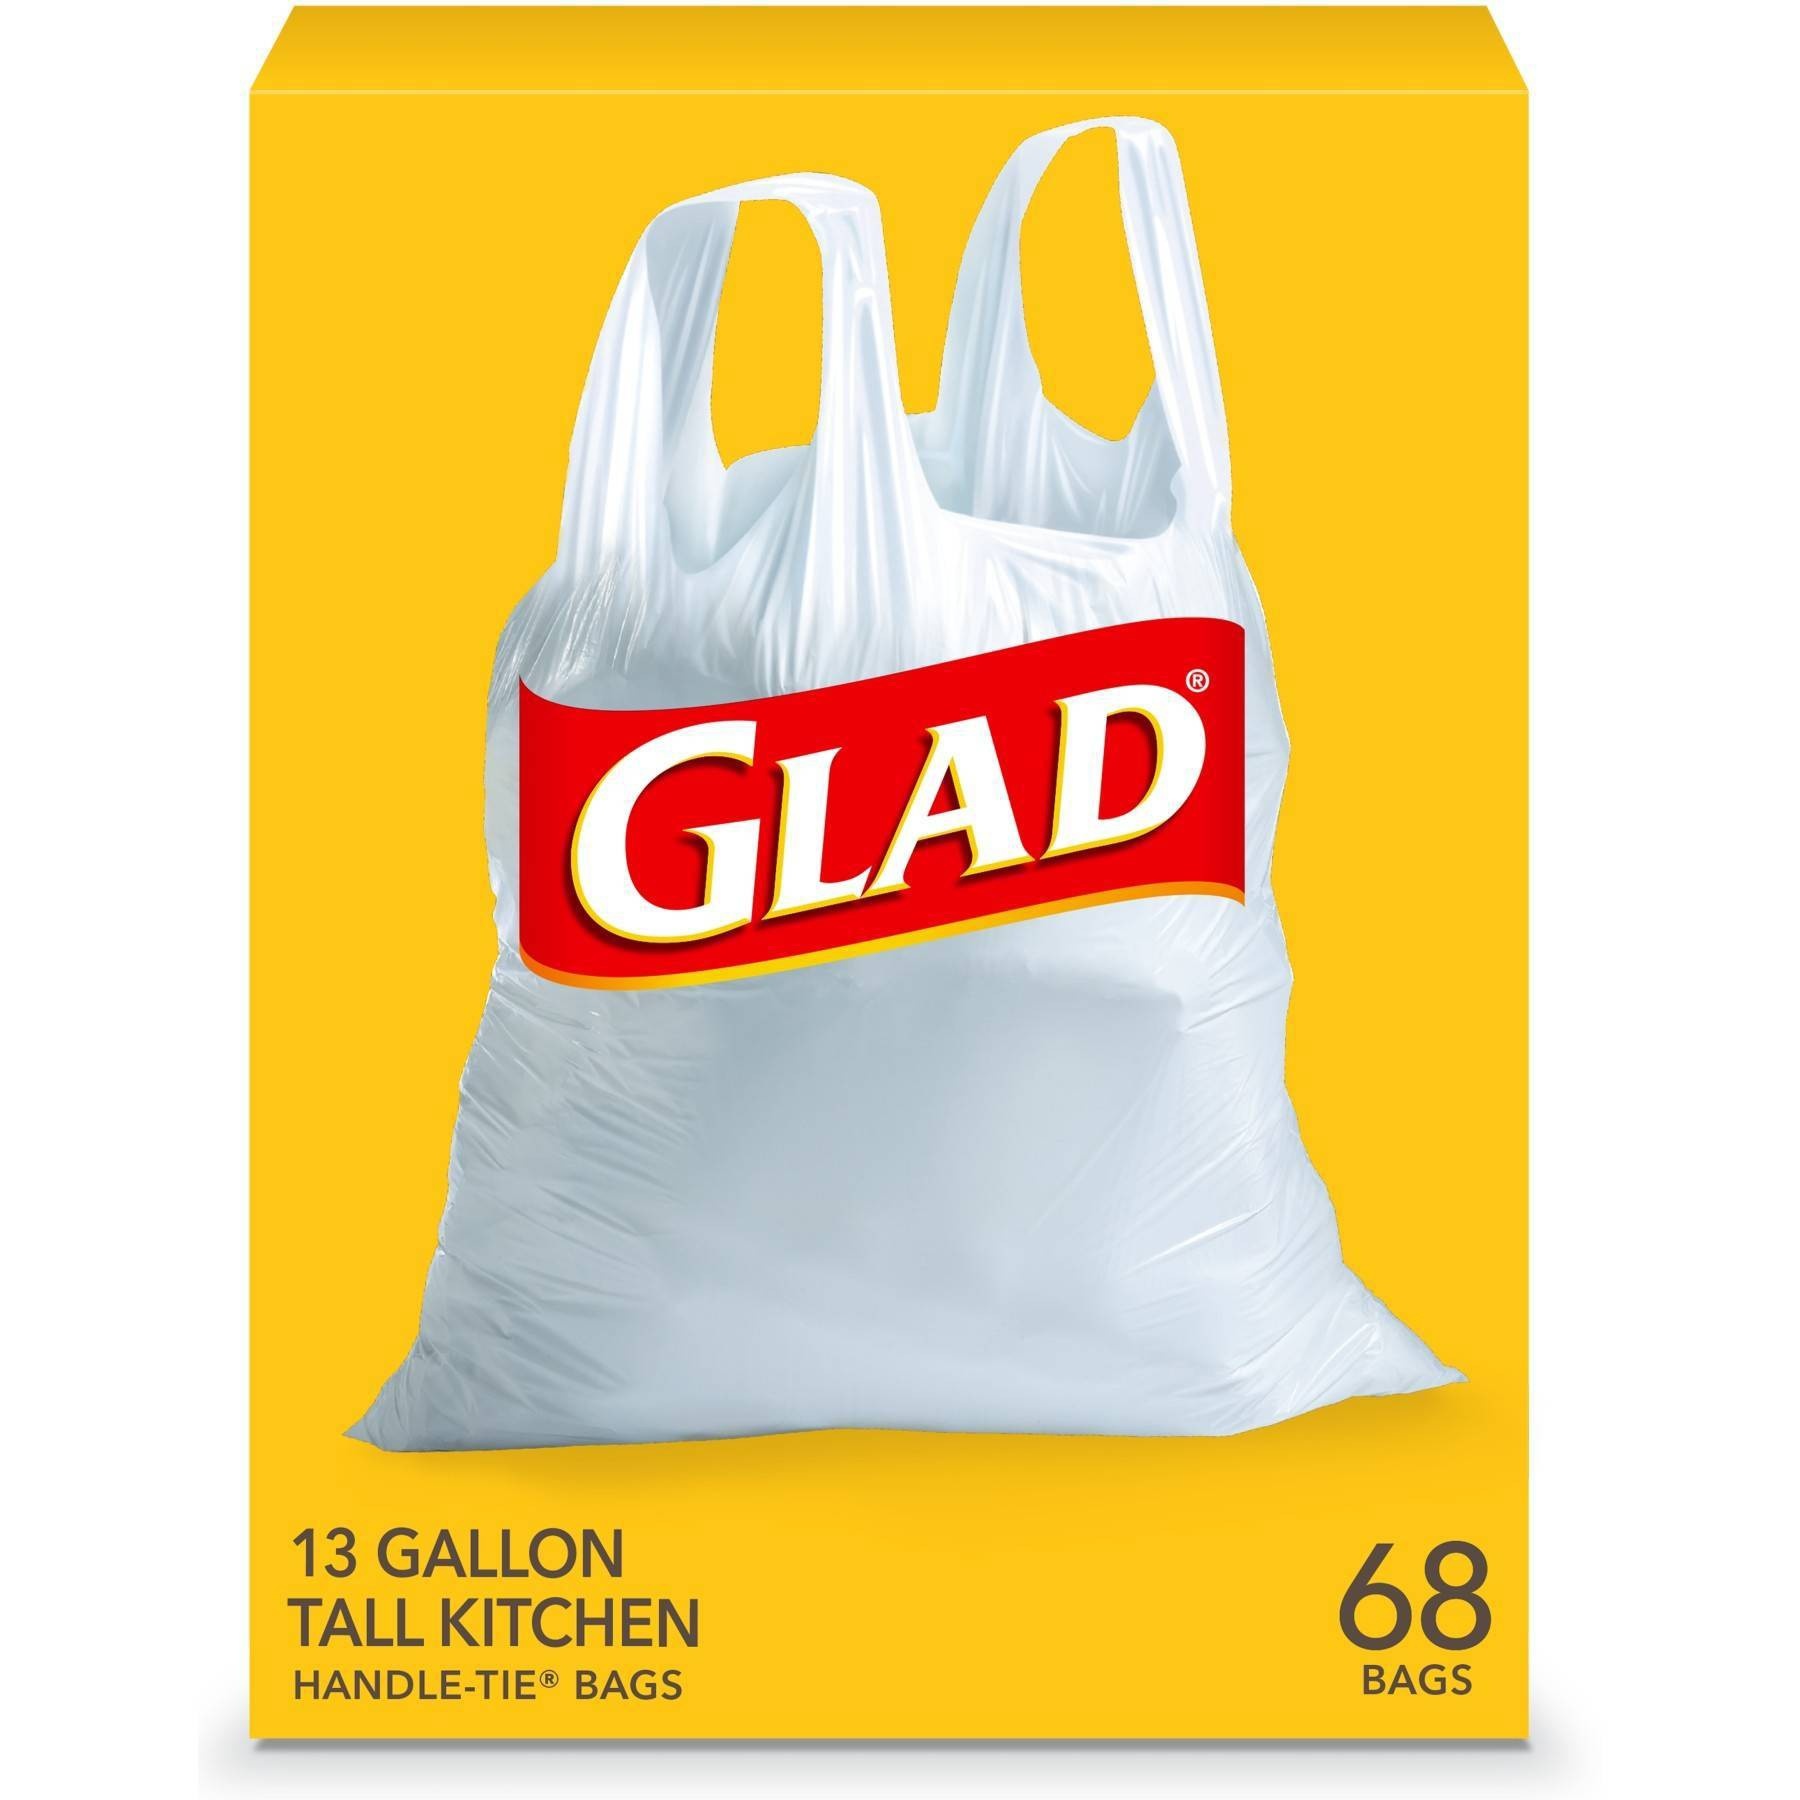 Meijer Small Trash Bags With Flap Ties, 4 Gallon, 30 ct